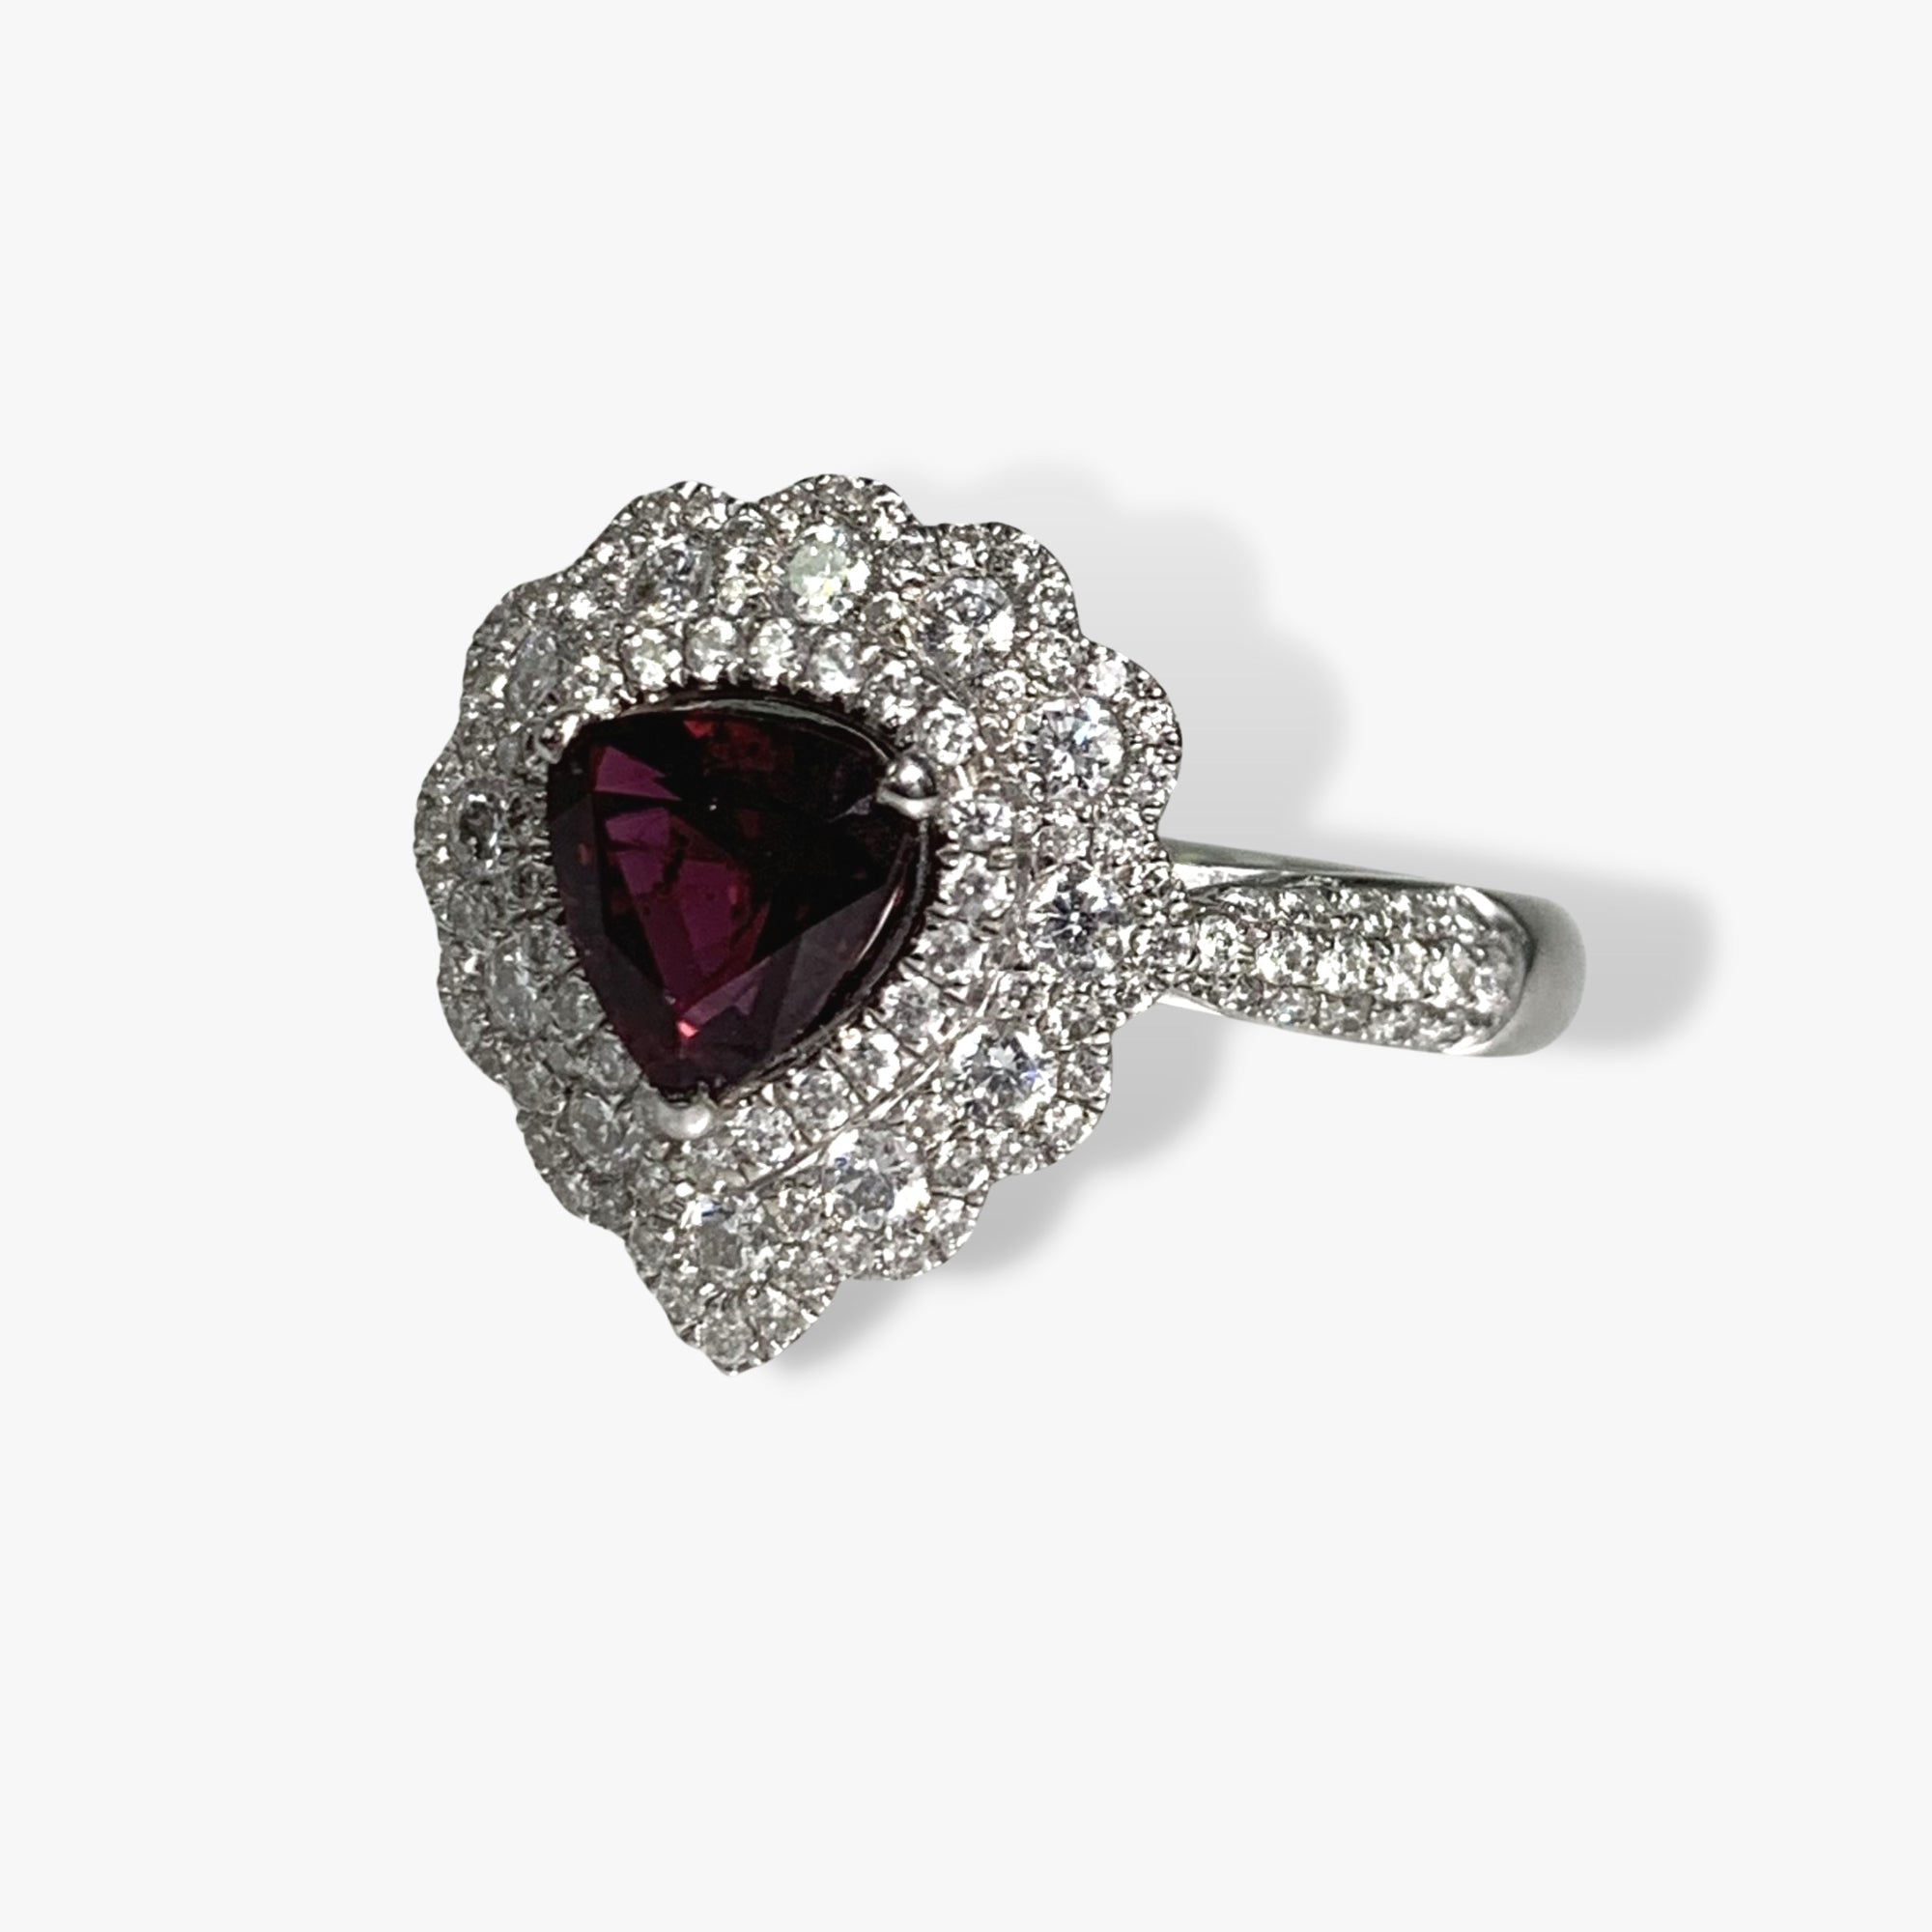 18k White Gold Trillion Cut Ruby Diamond Cluster Ring Side View